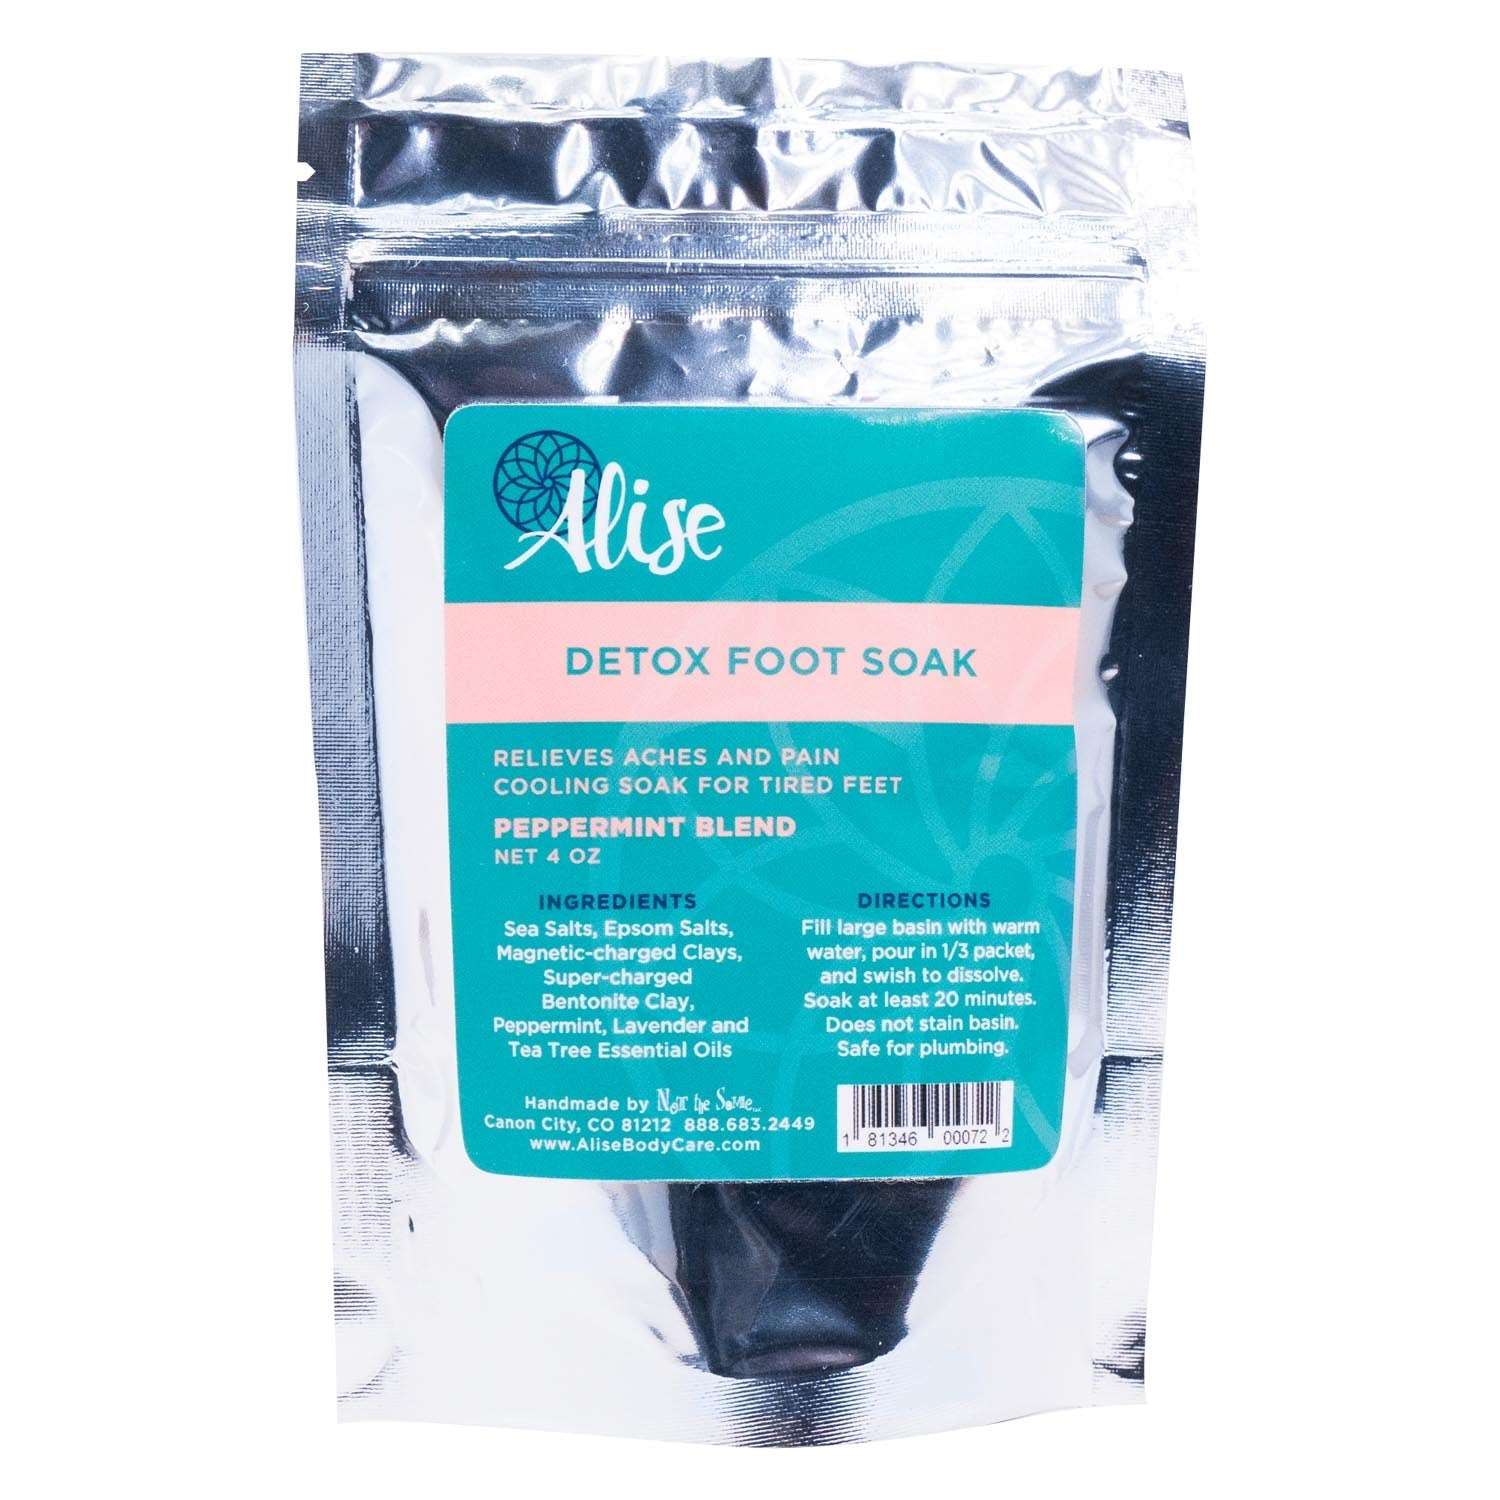 Detox Foot Soak Peppermint Blend 4oz handcrafted by Alise Body Care